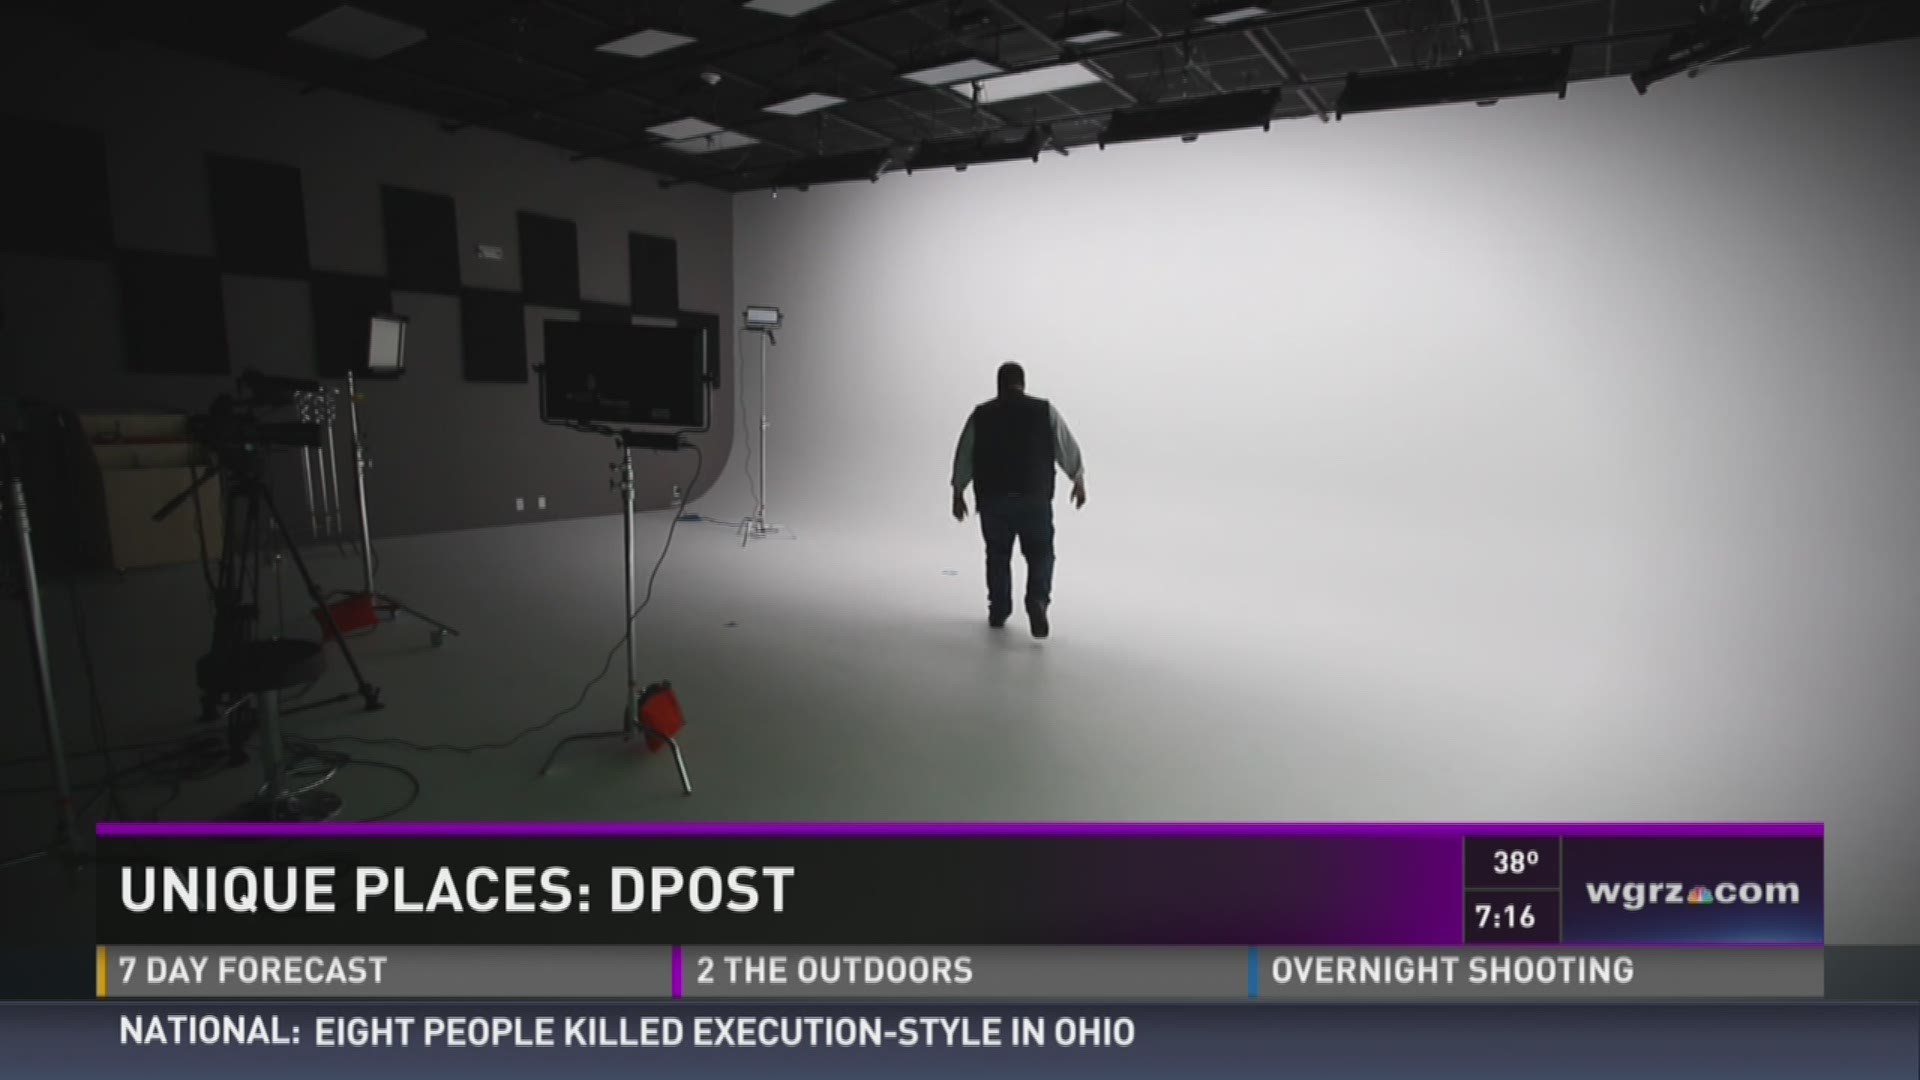 In this week's Unique Places, Daybreak's Nate Benson takes us to dPost, a post production company on Main Street in Buffalo.